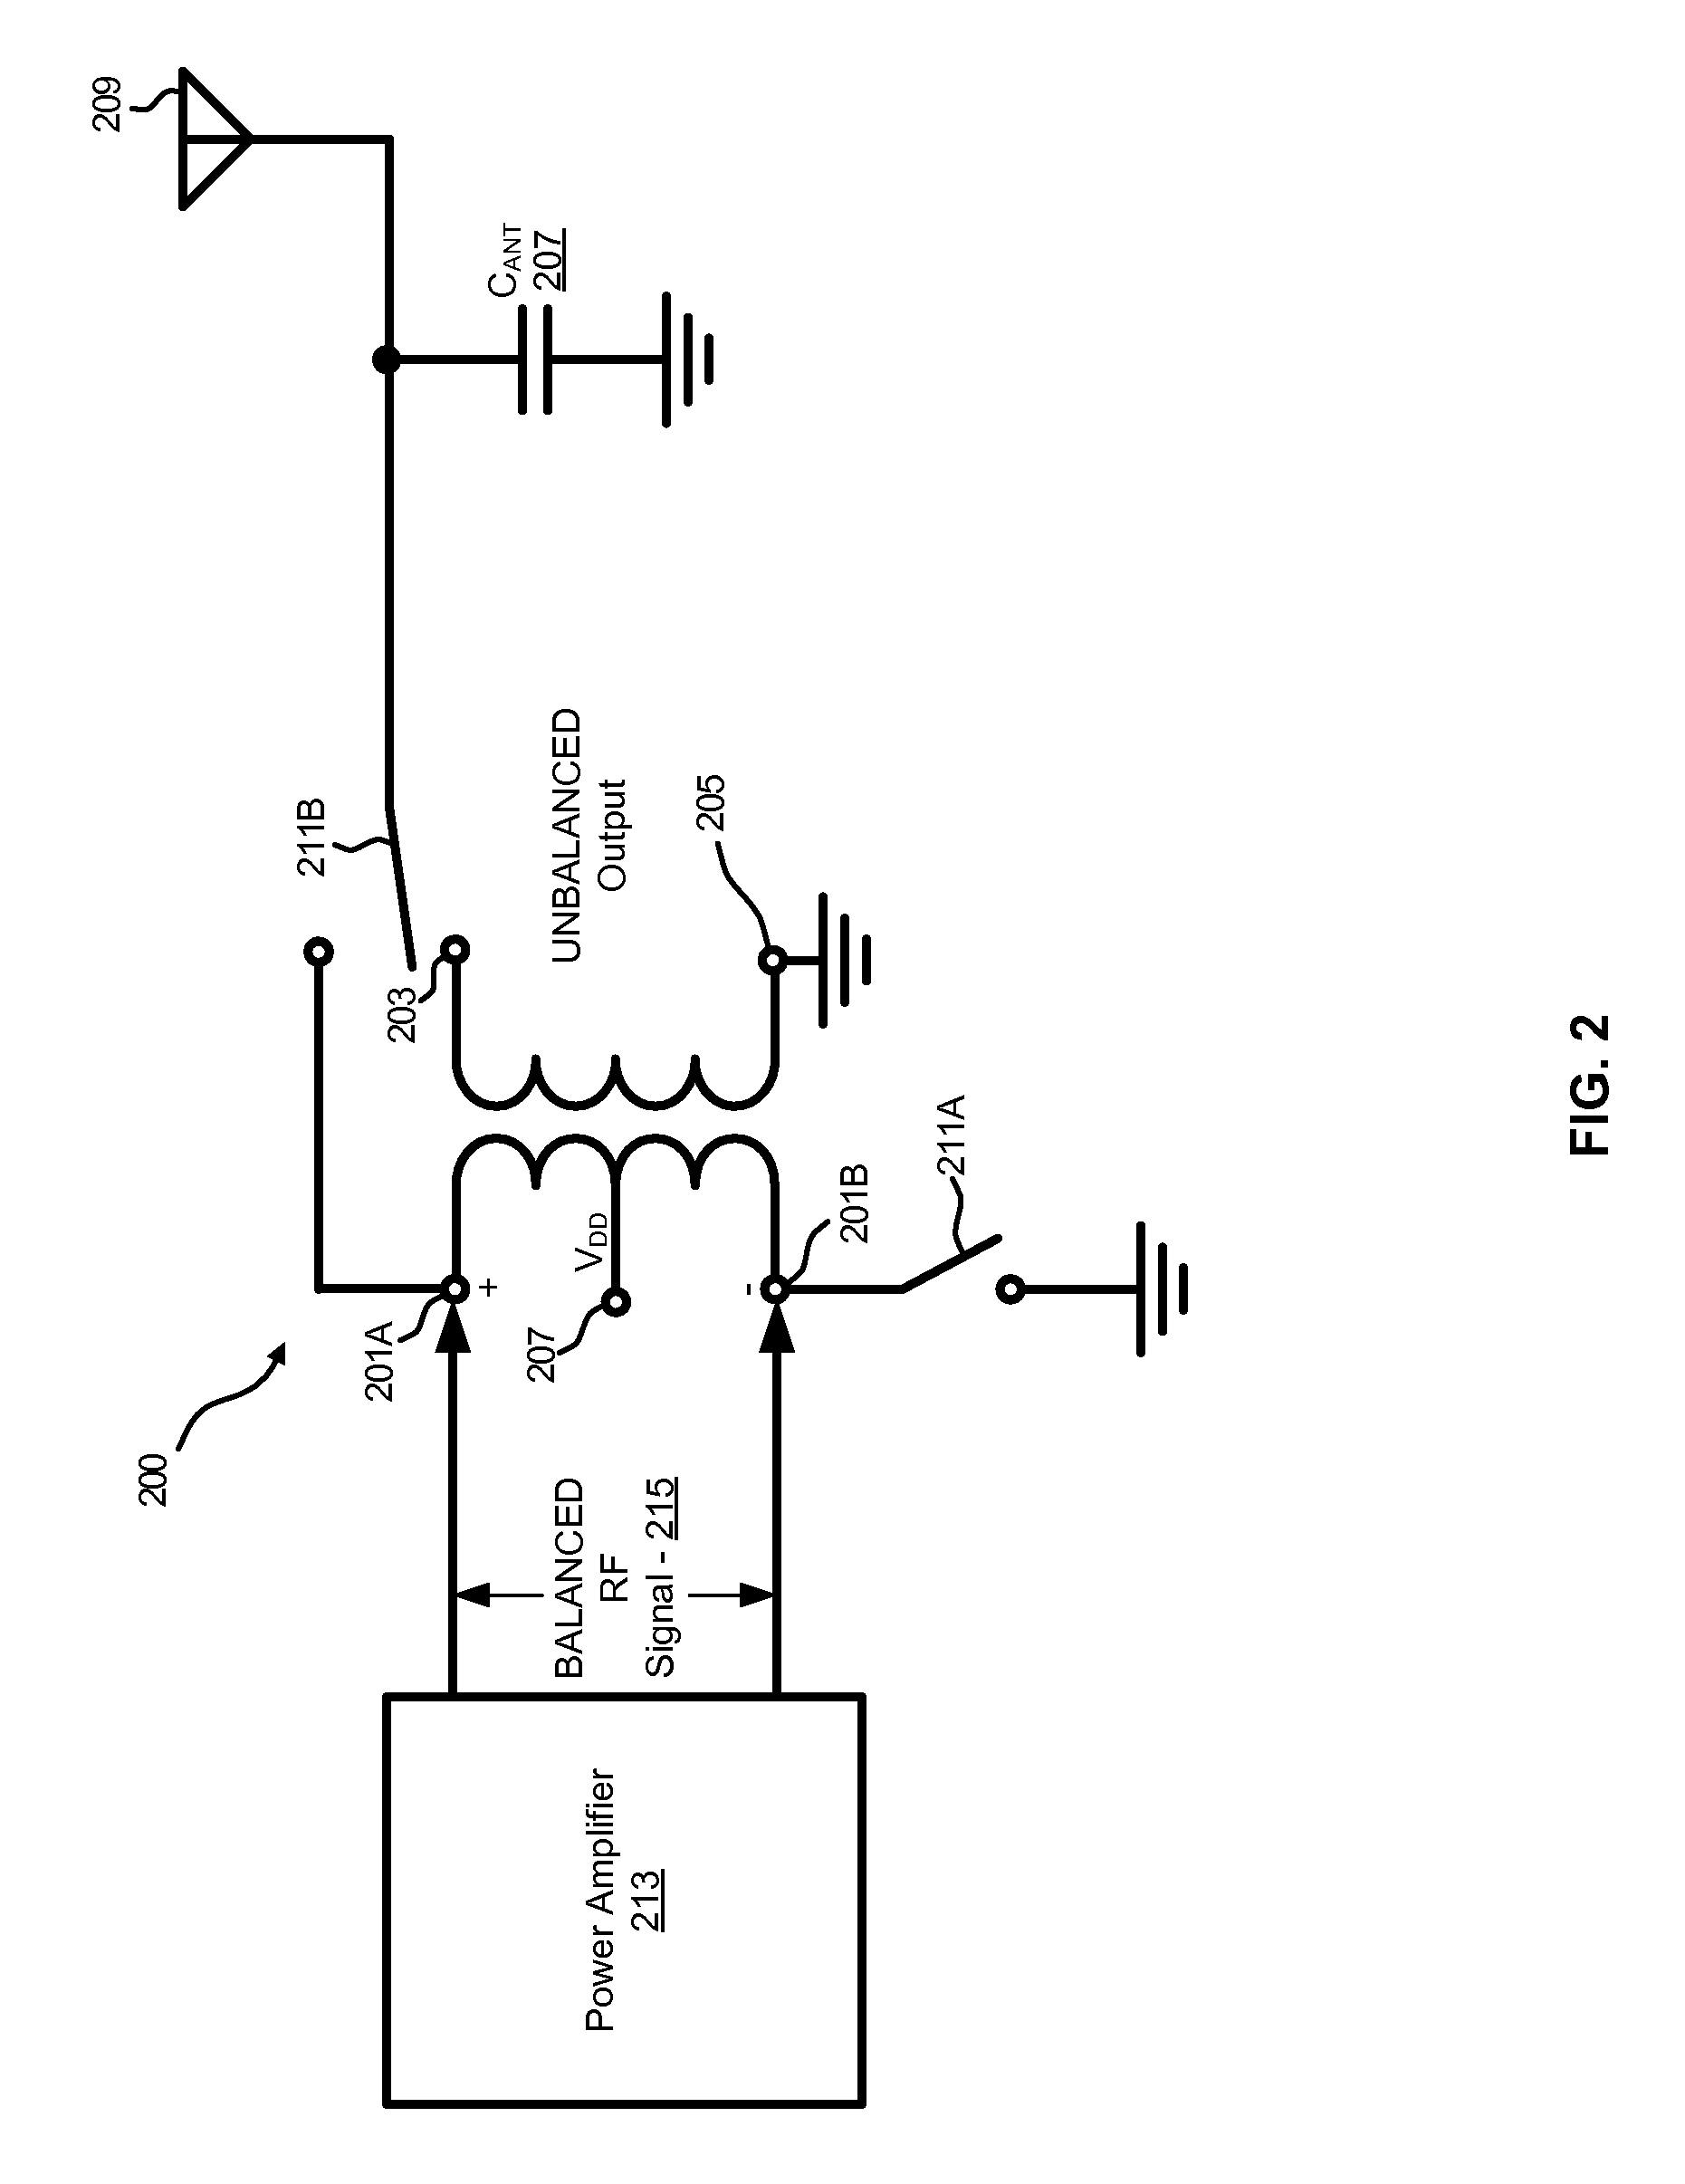 Method and system for a balun embedded in an integrated circuit package